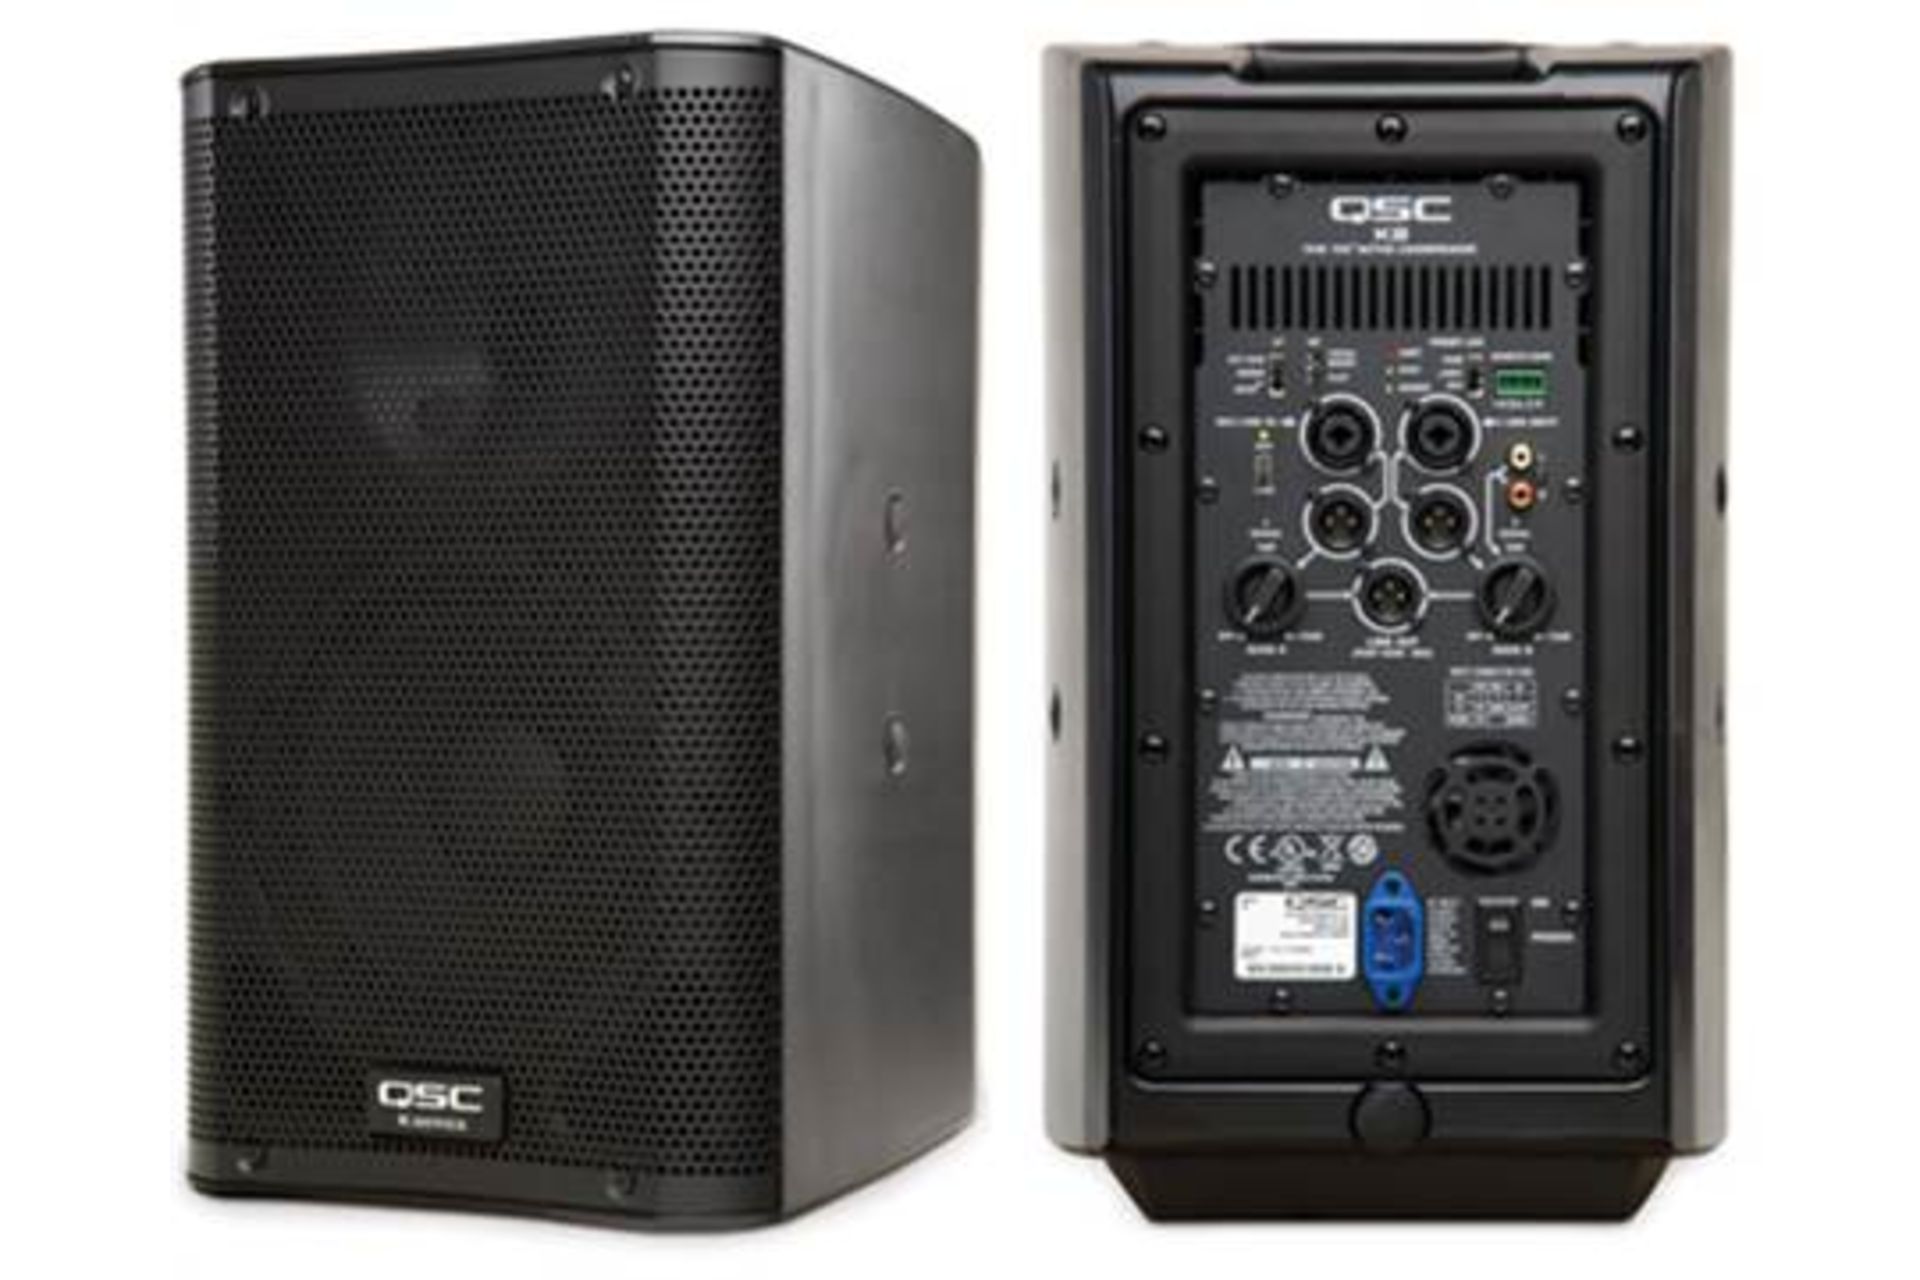 2 x QSC K8 1000w Lightweight Portable Powered Speakers With Legendary QSC Amplifier Power and